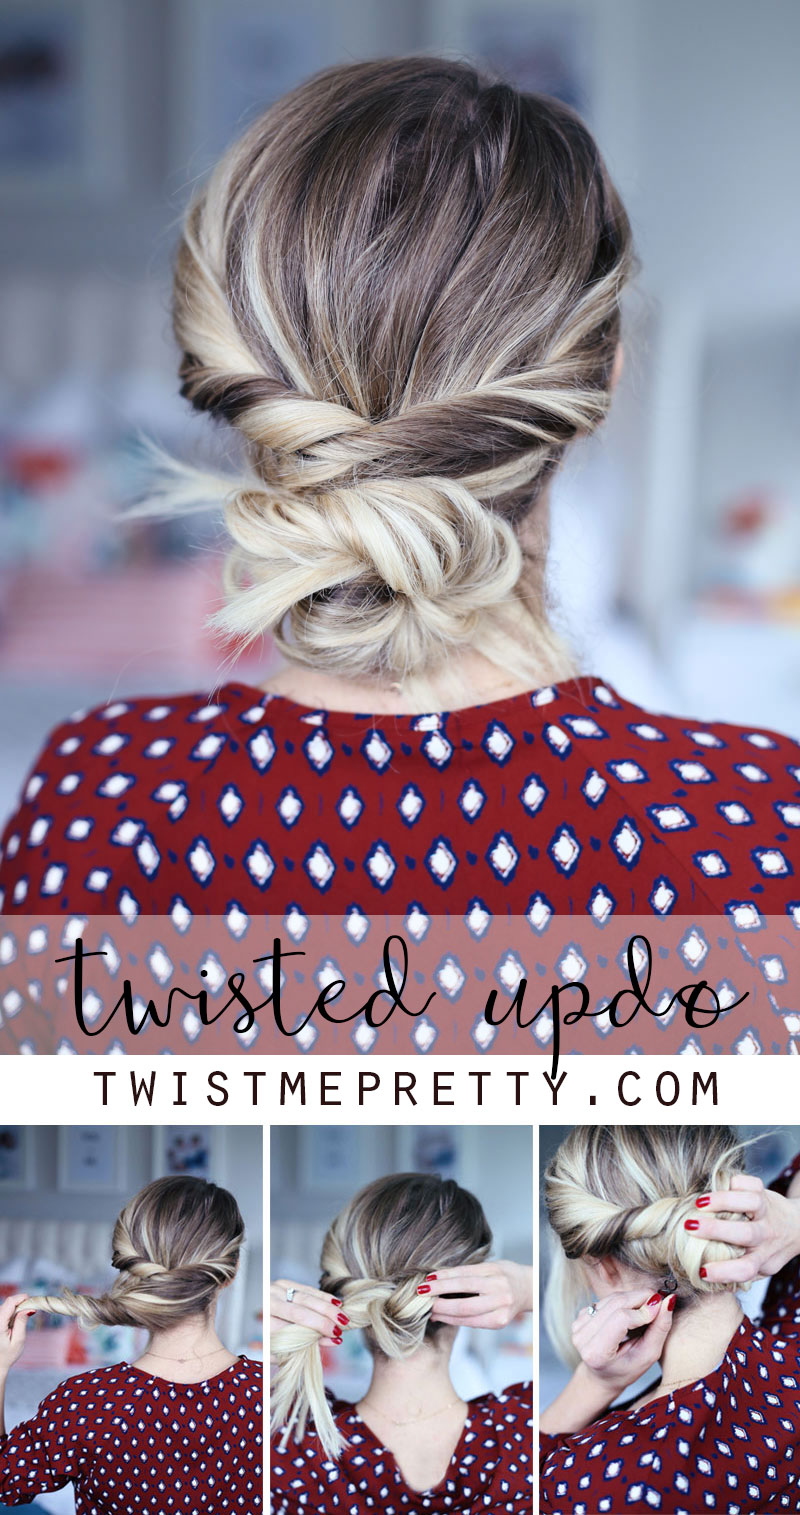 Use a spin pin to create a Twisted Up-do. It's easy! Learn how at Twist Me Pretty.